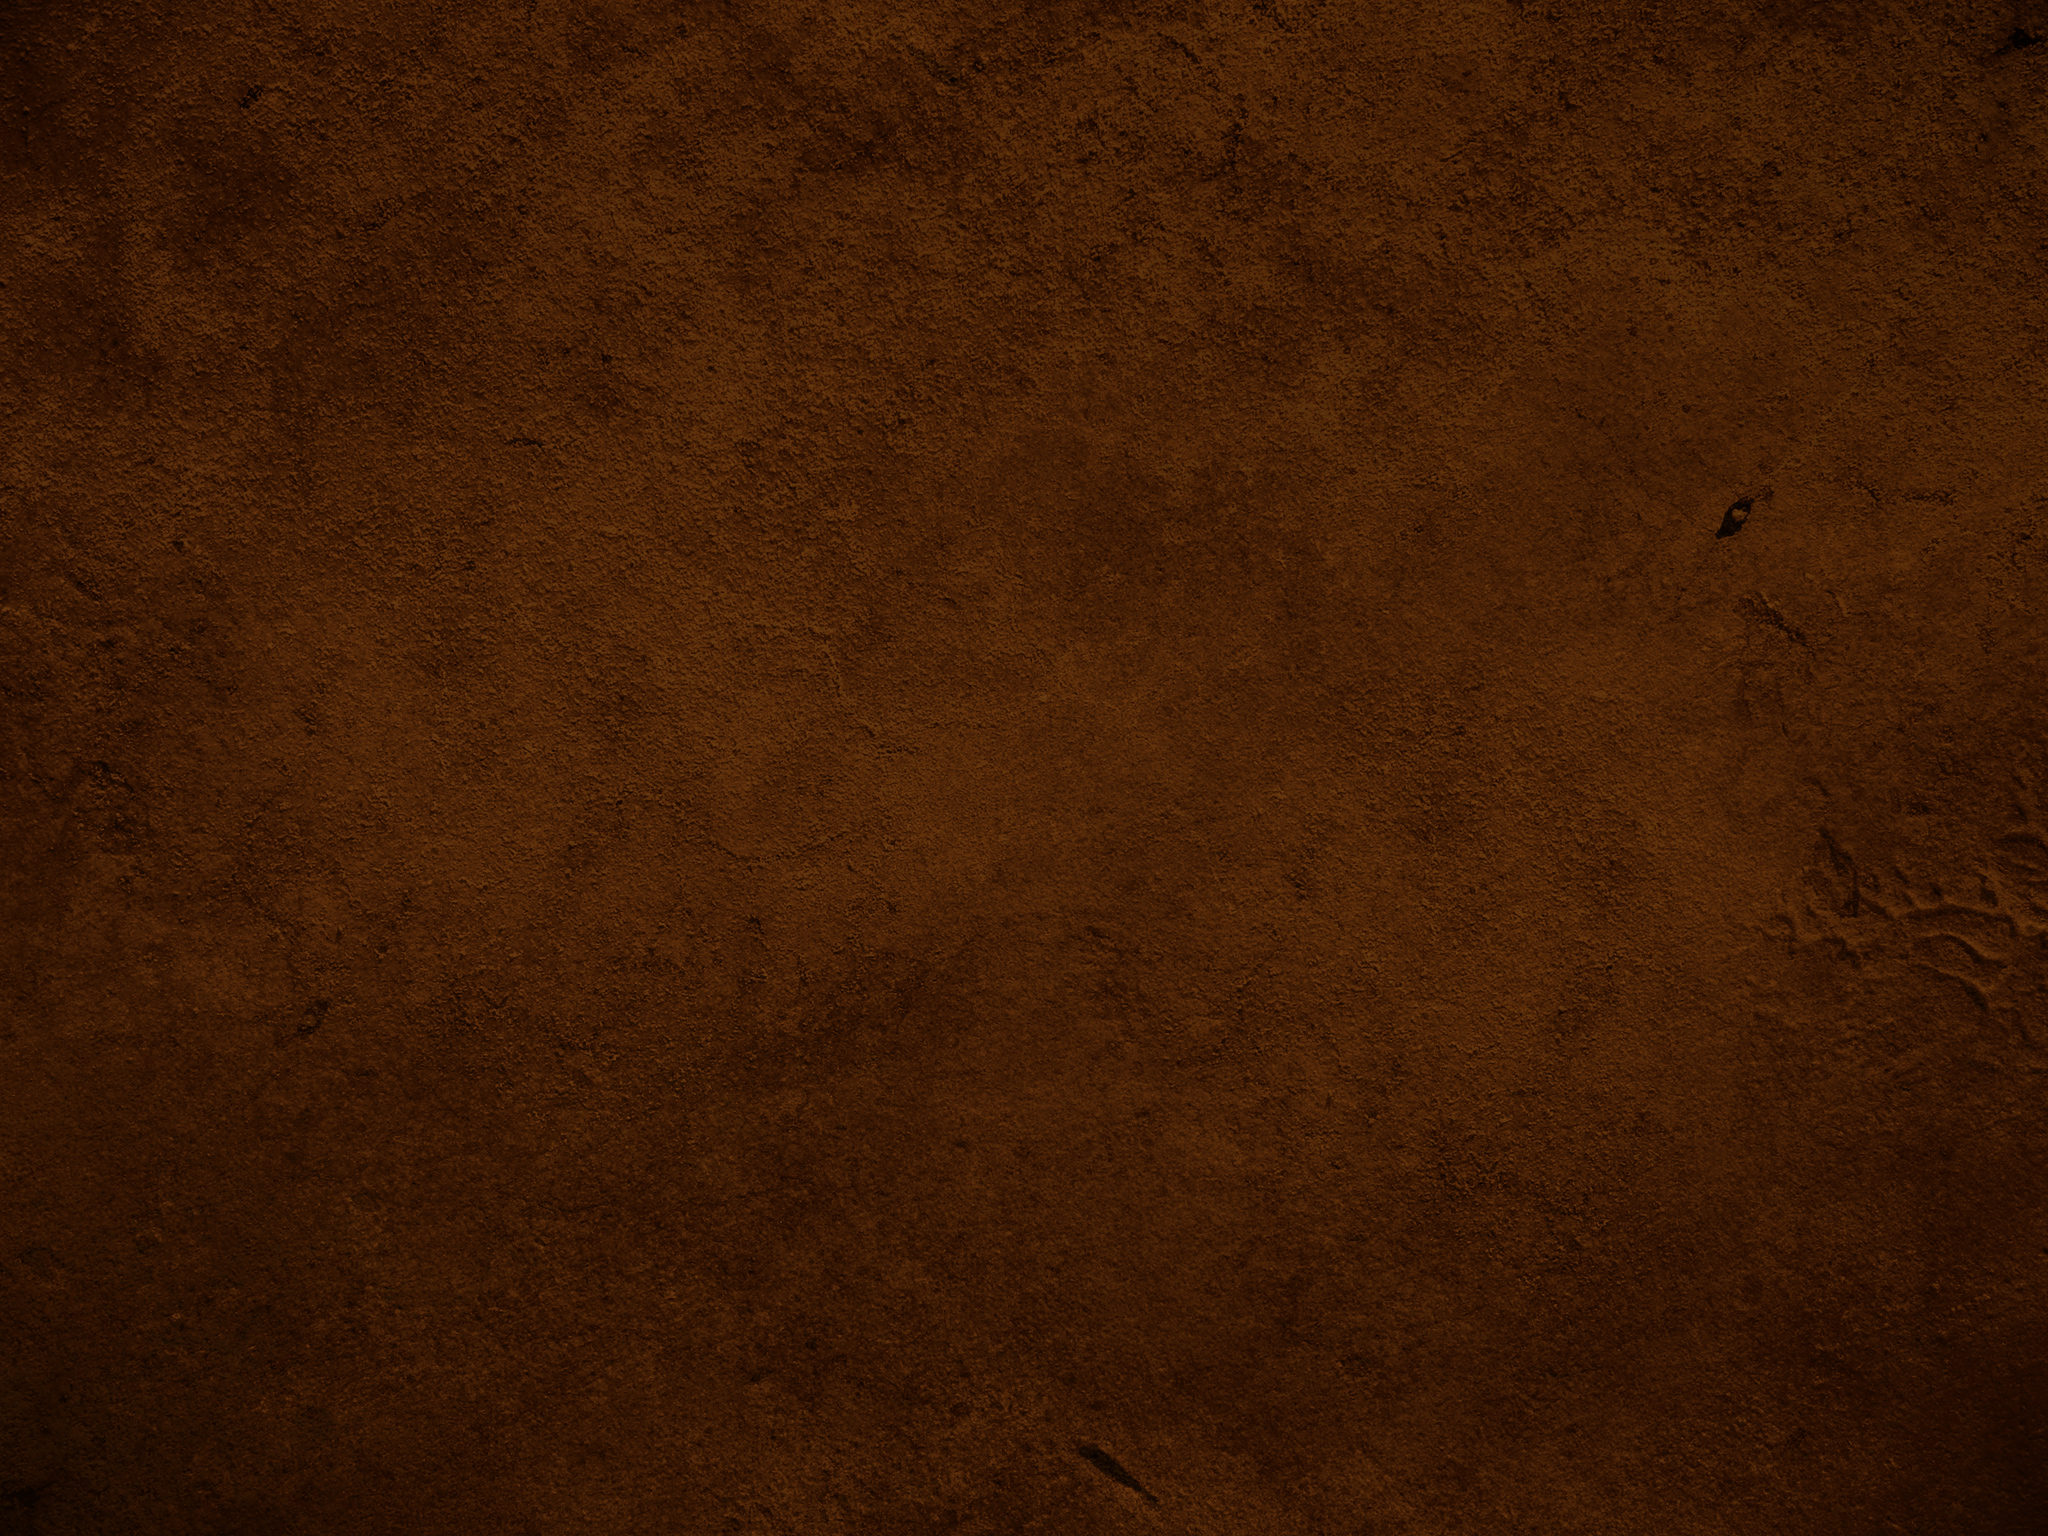 One Color Brown Background - 2048x1536 Wallpaper 